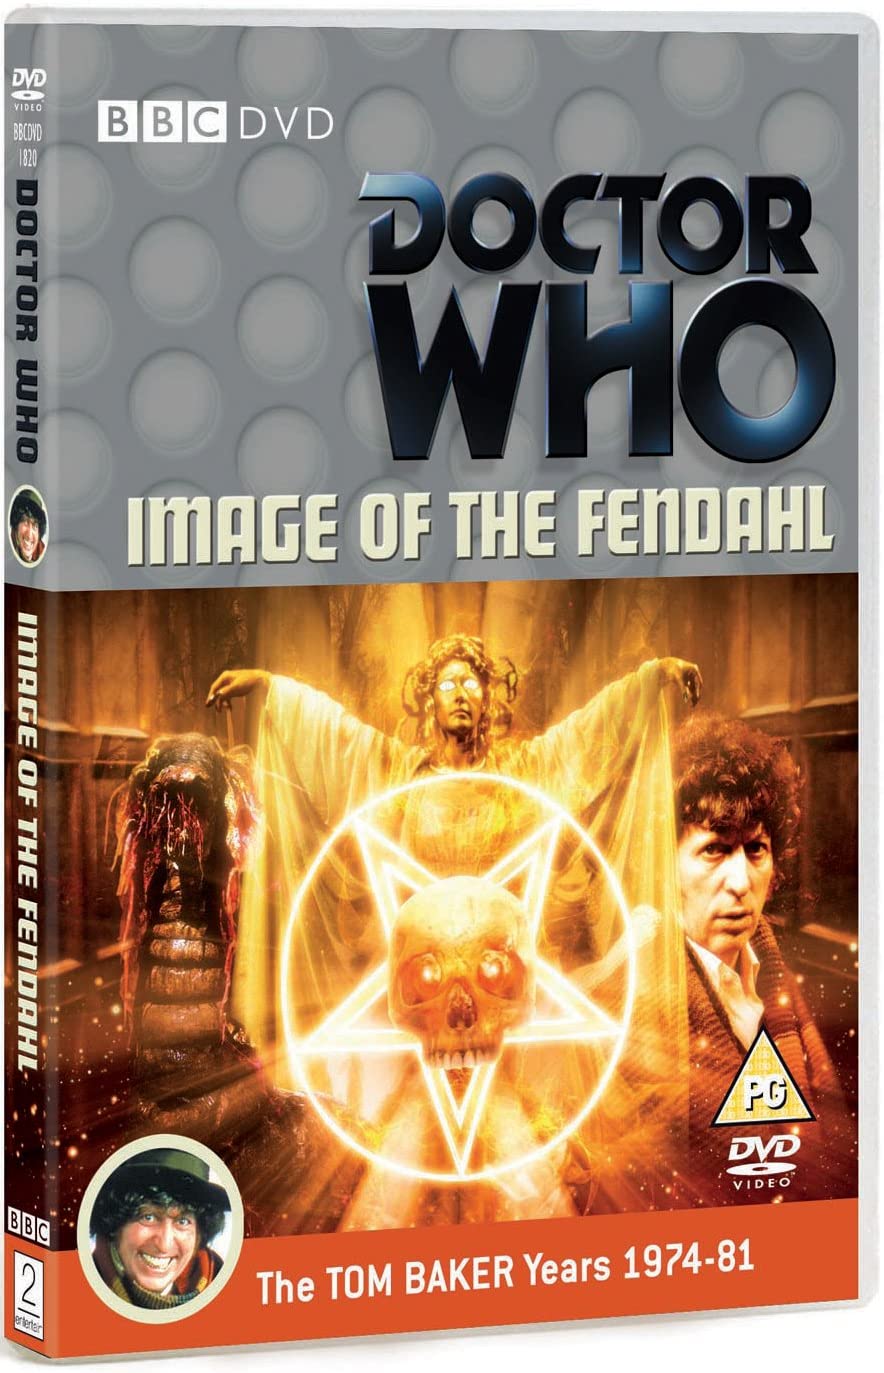 Doctor Who - Image of the Fendahl [1977] - Sci-fi [DVD]